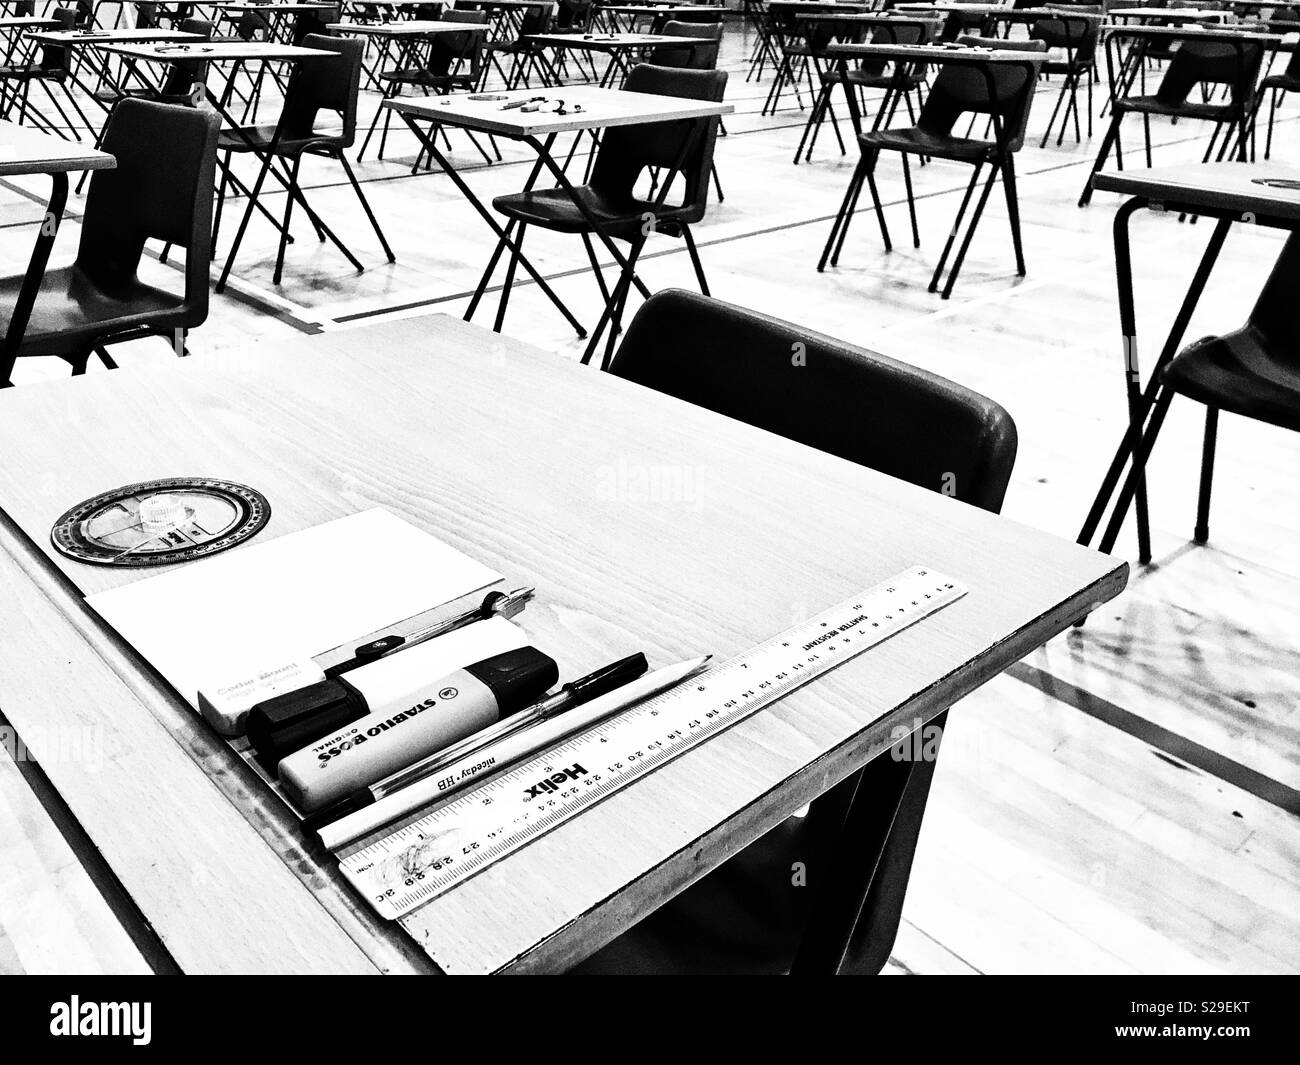 Exam tables waiting for students Stock Photo